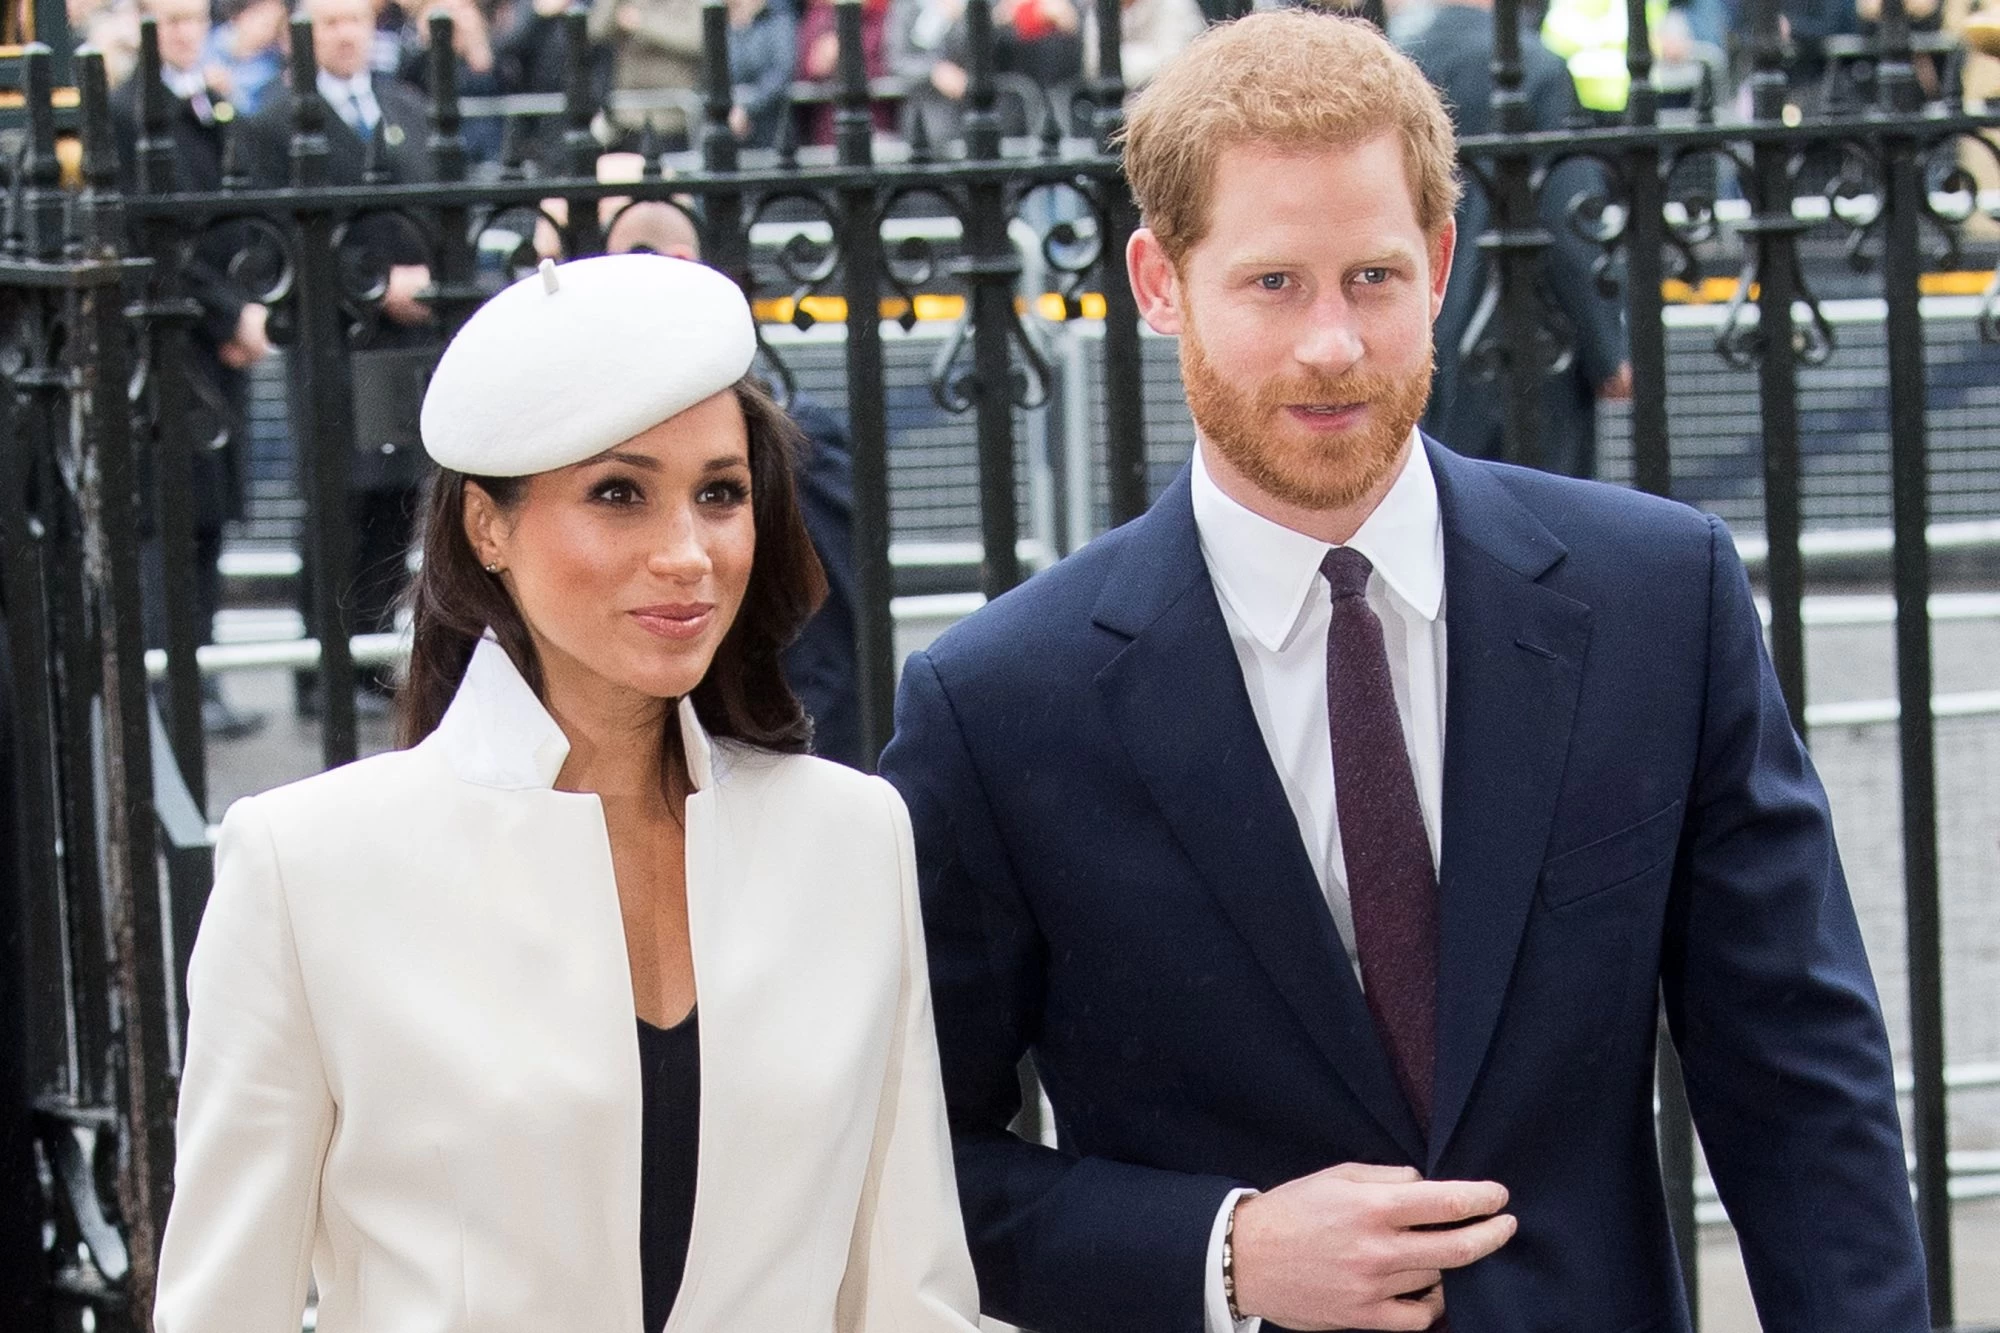 Harry, Meghan welcome second child, Lilibet ‘Lili’ Diana